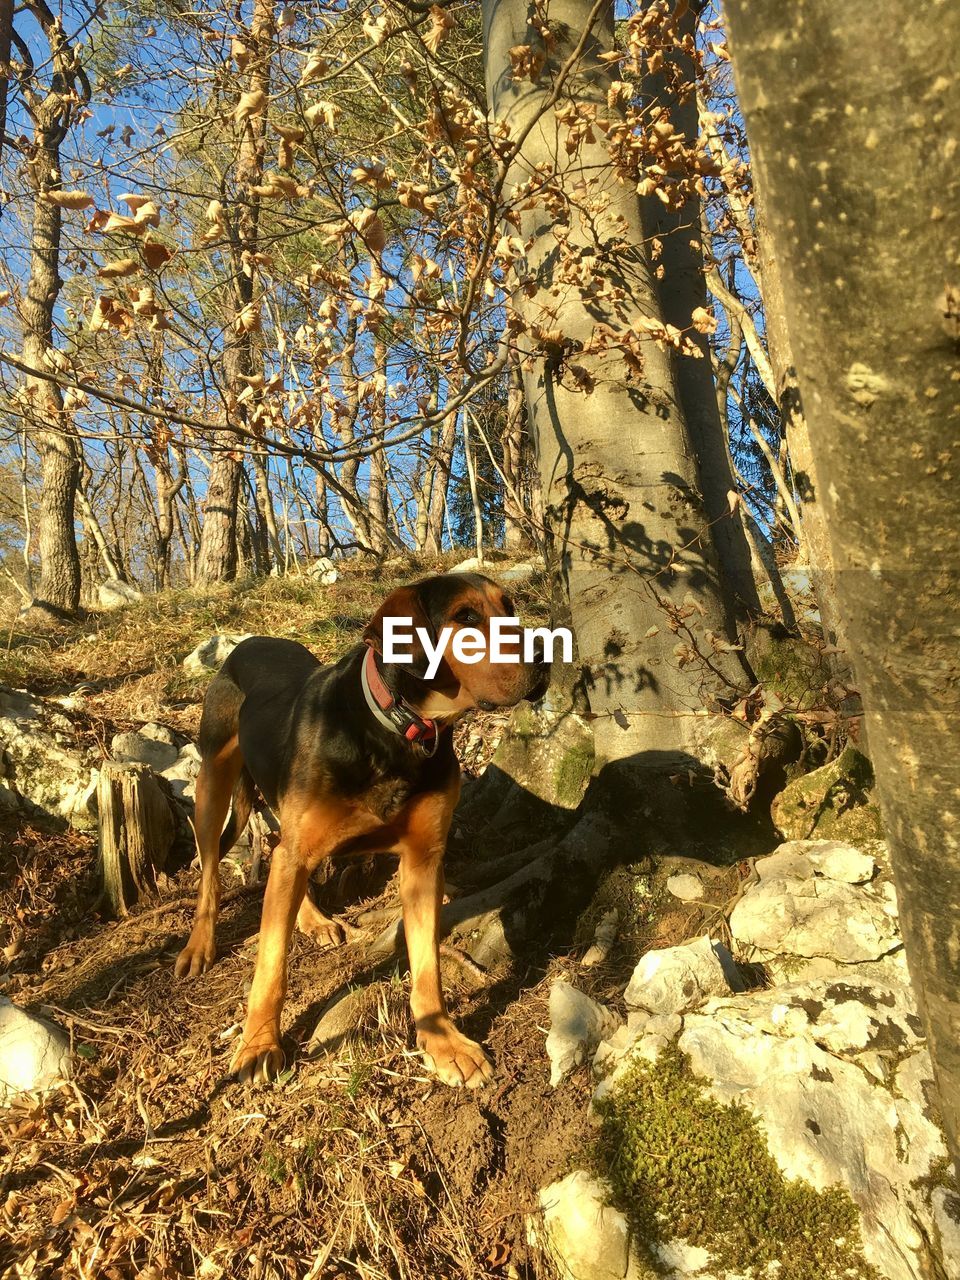 DOG STANDING IN FOREST